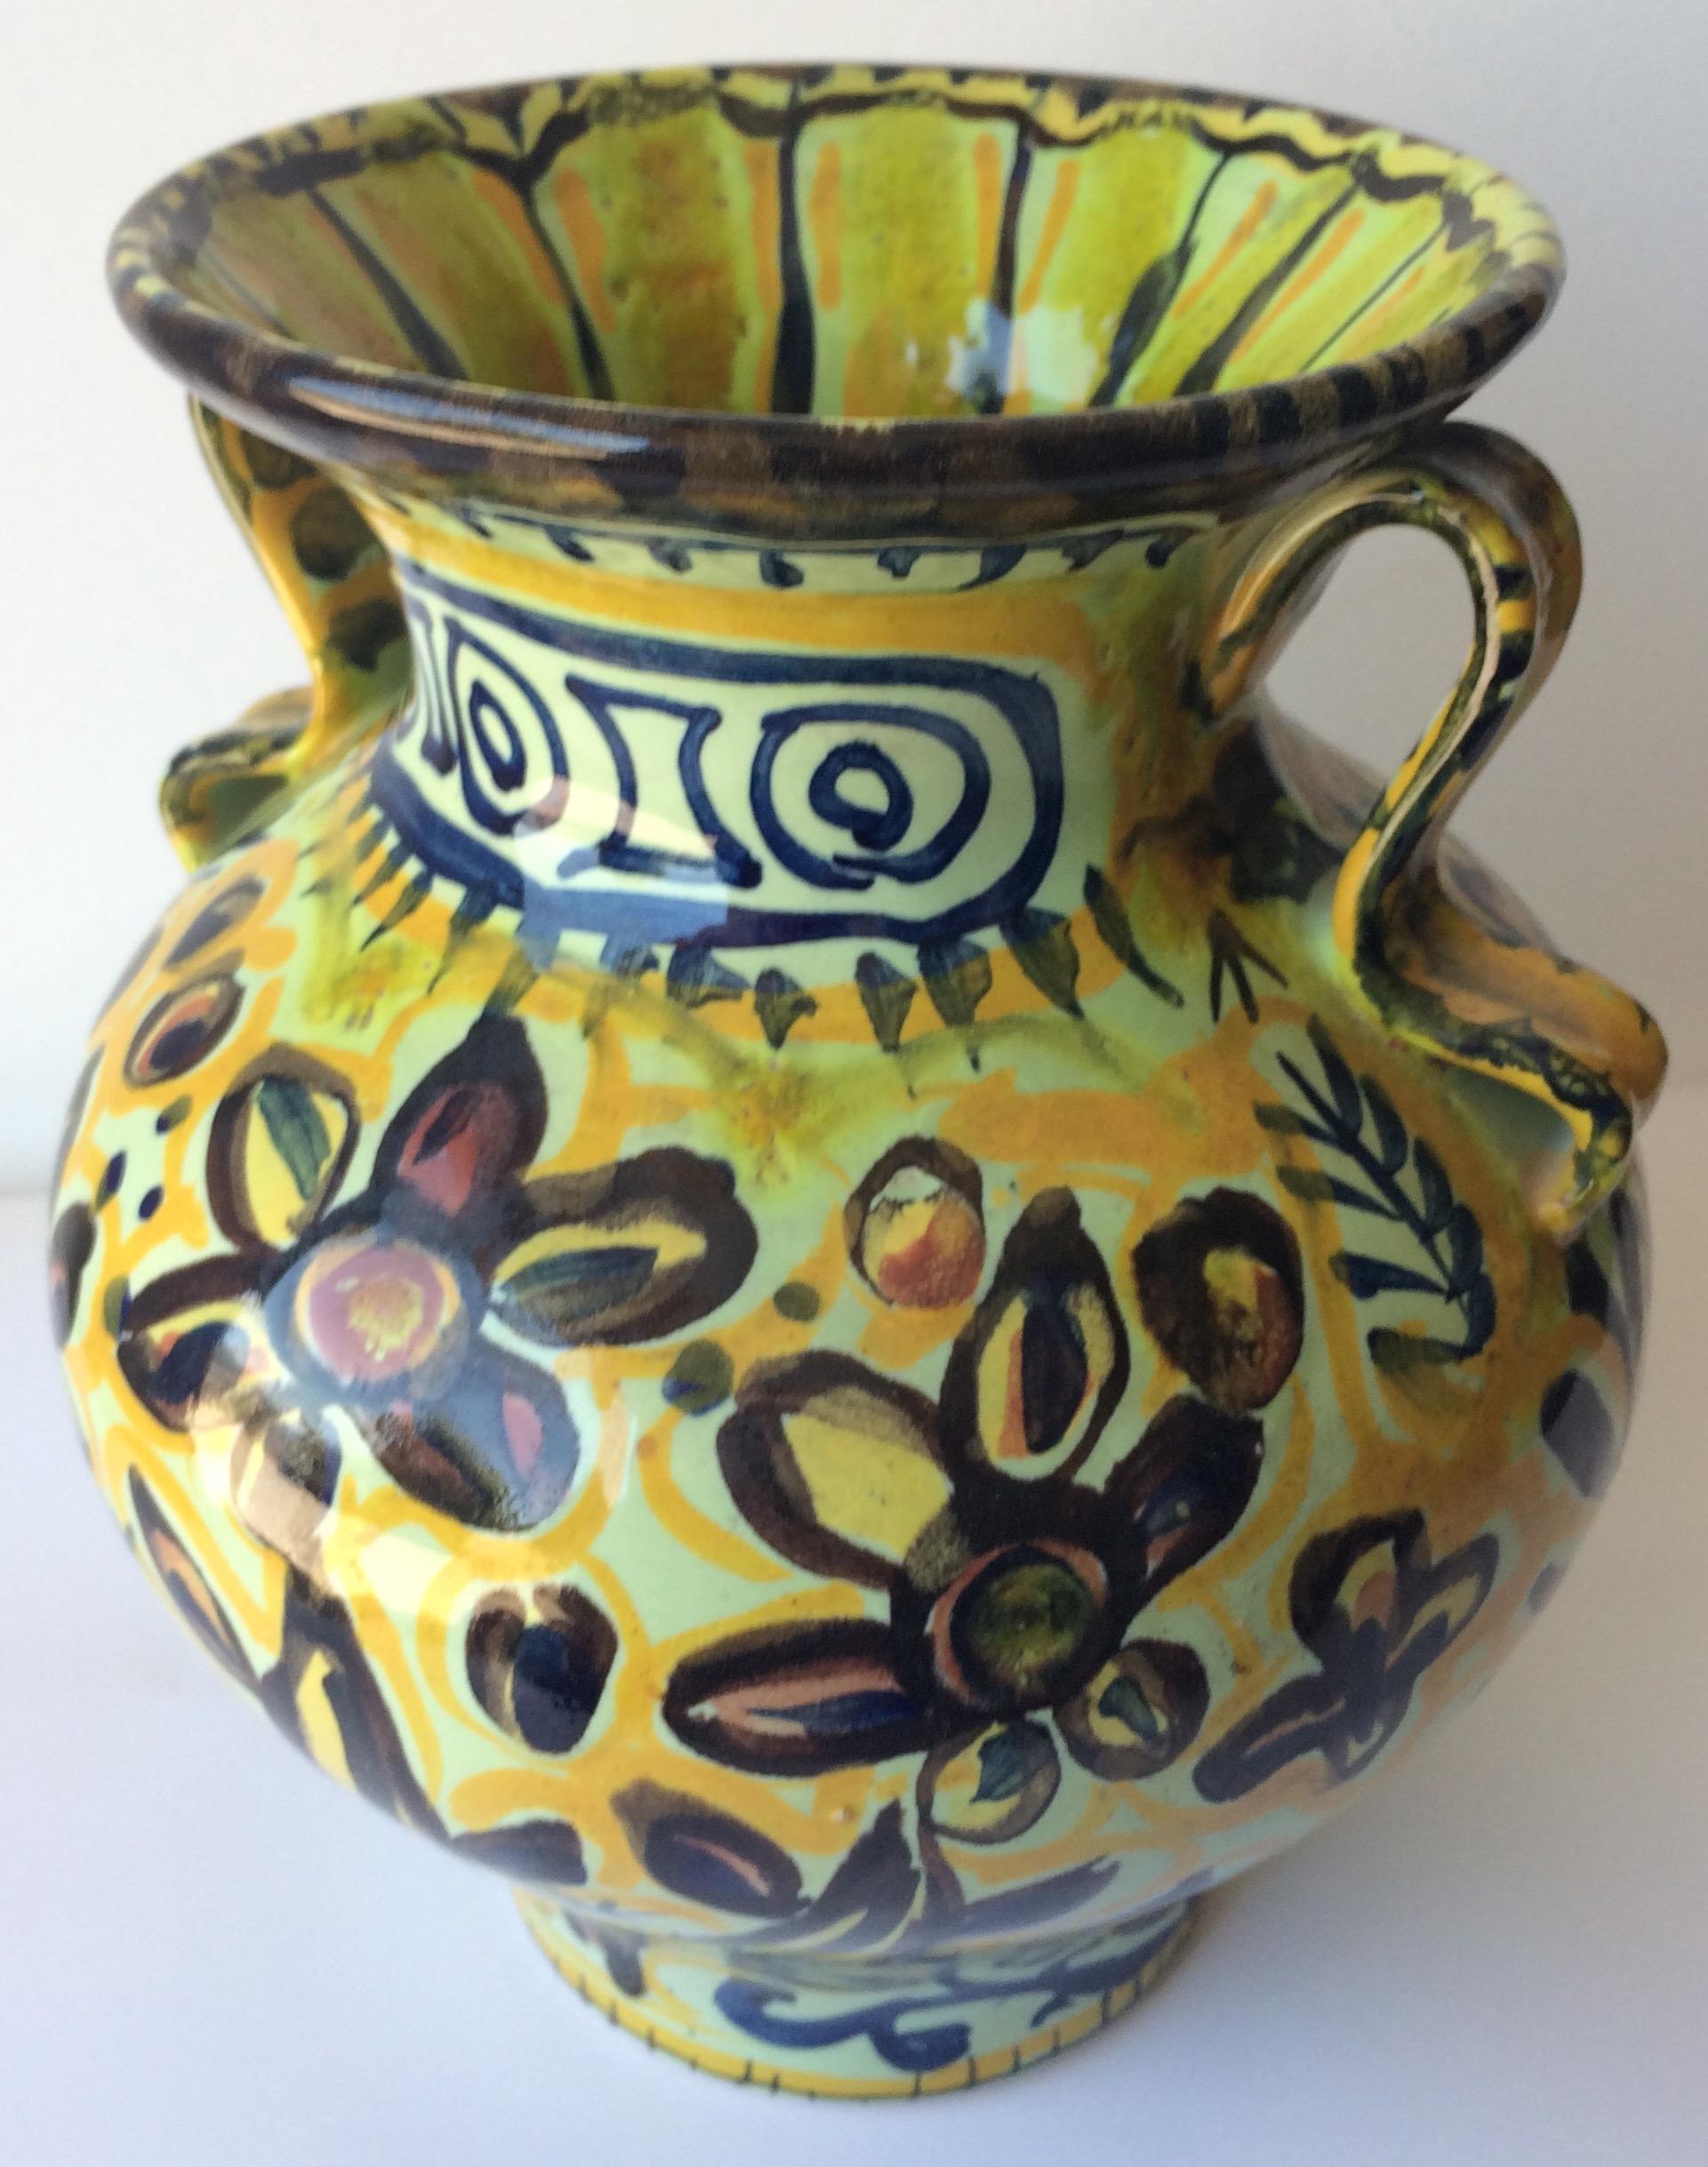 French Ceramic Vase with Handles from Quimper, France by Keraluc Pottery Studio In Good Condition For Sale In Miami, FL